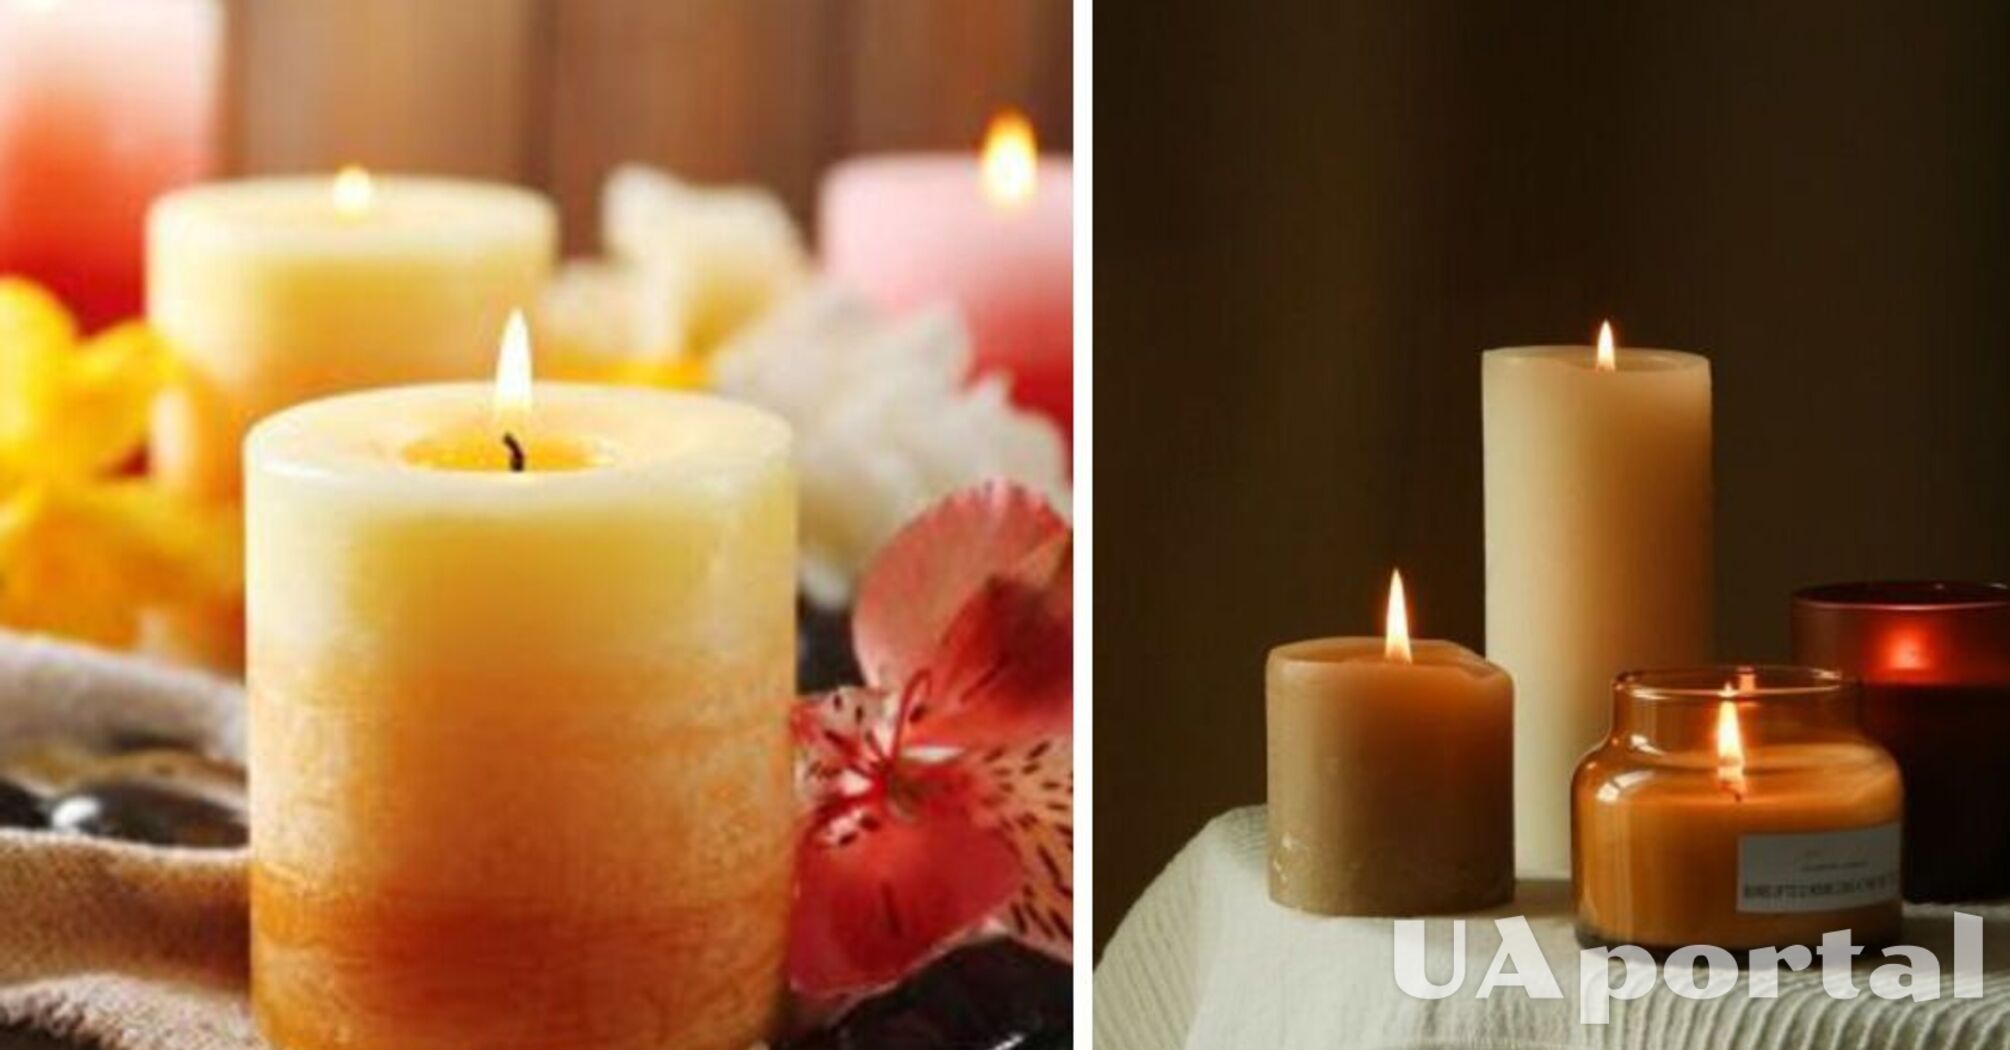 Becoming a health hazard: why aroma candles can be dangerous